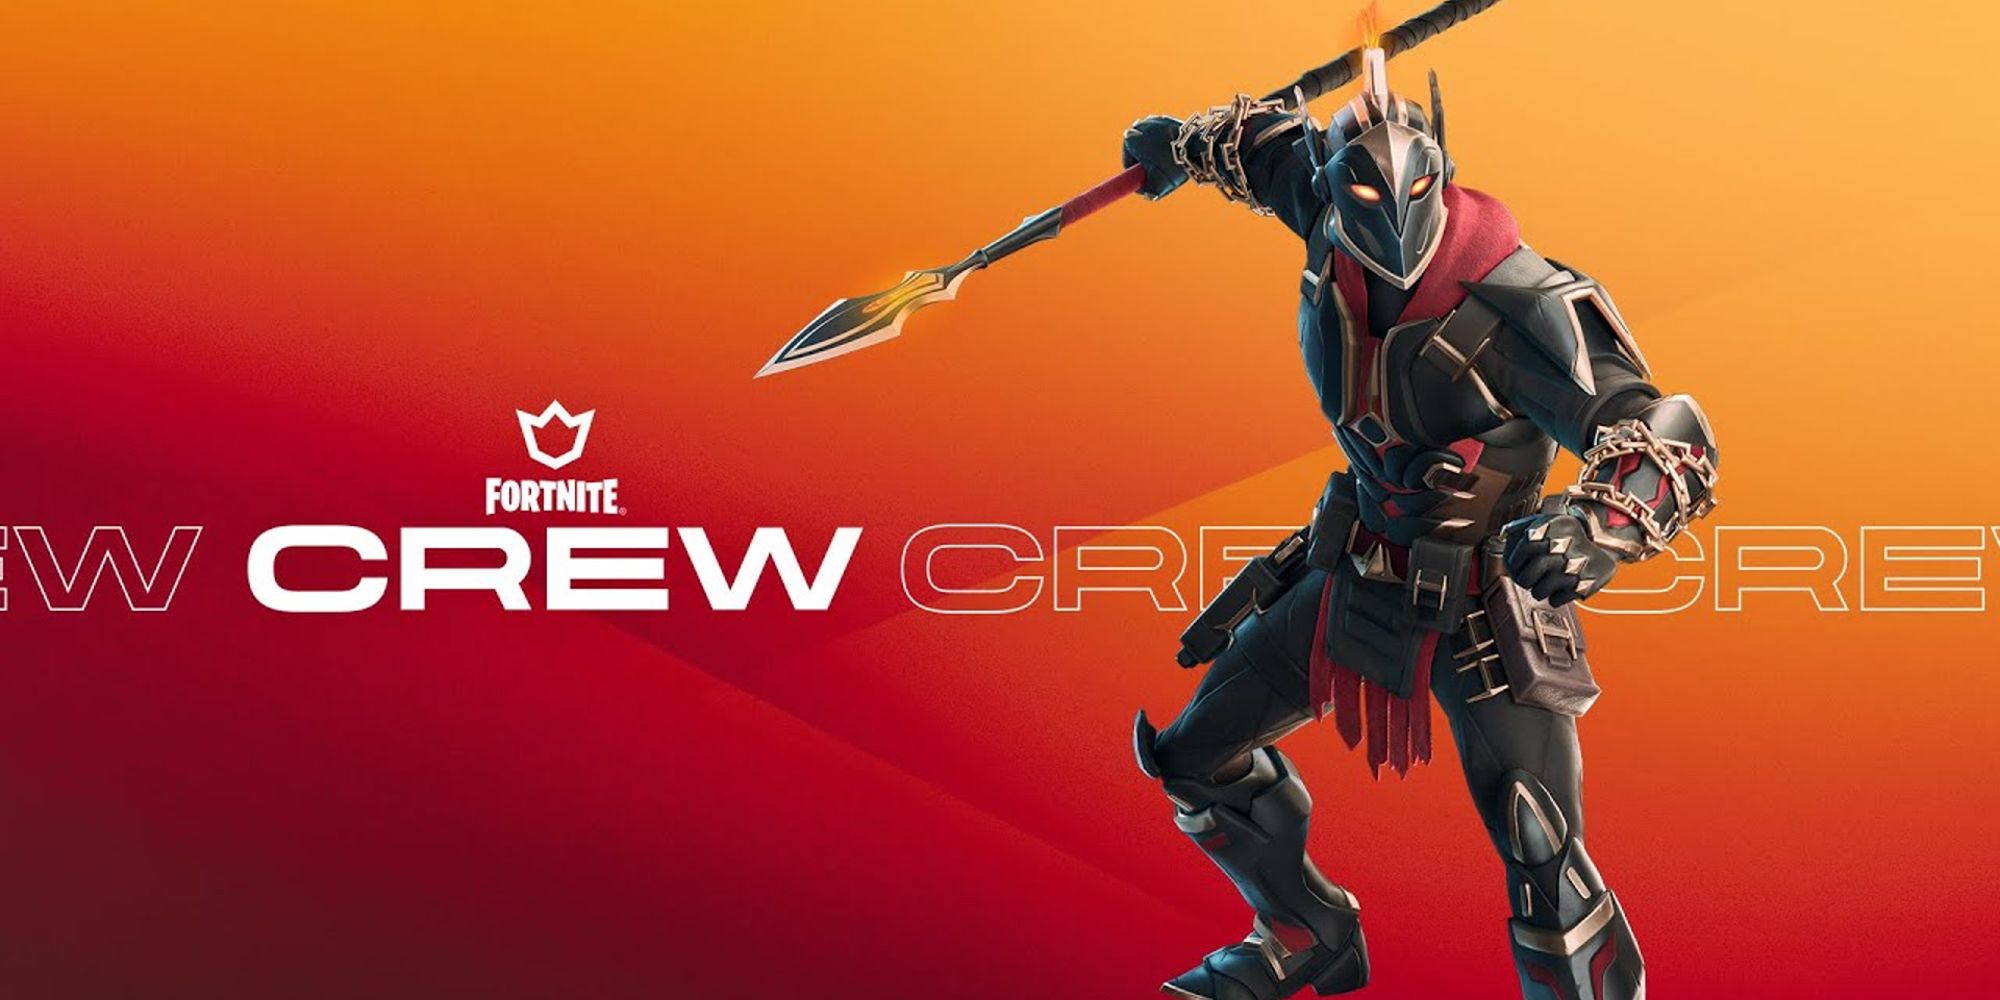 Fortnite April 2024 Crew Pack Official Art Featuring Ares Holding Spear In Ready Stance Against Red And Orange Background